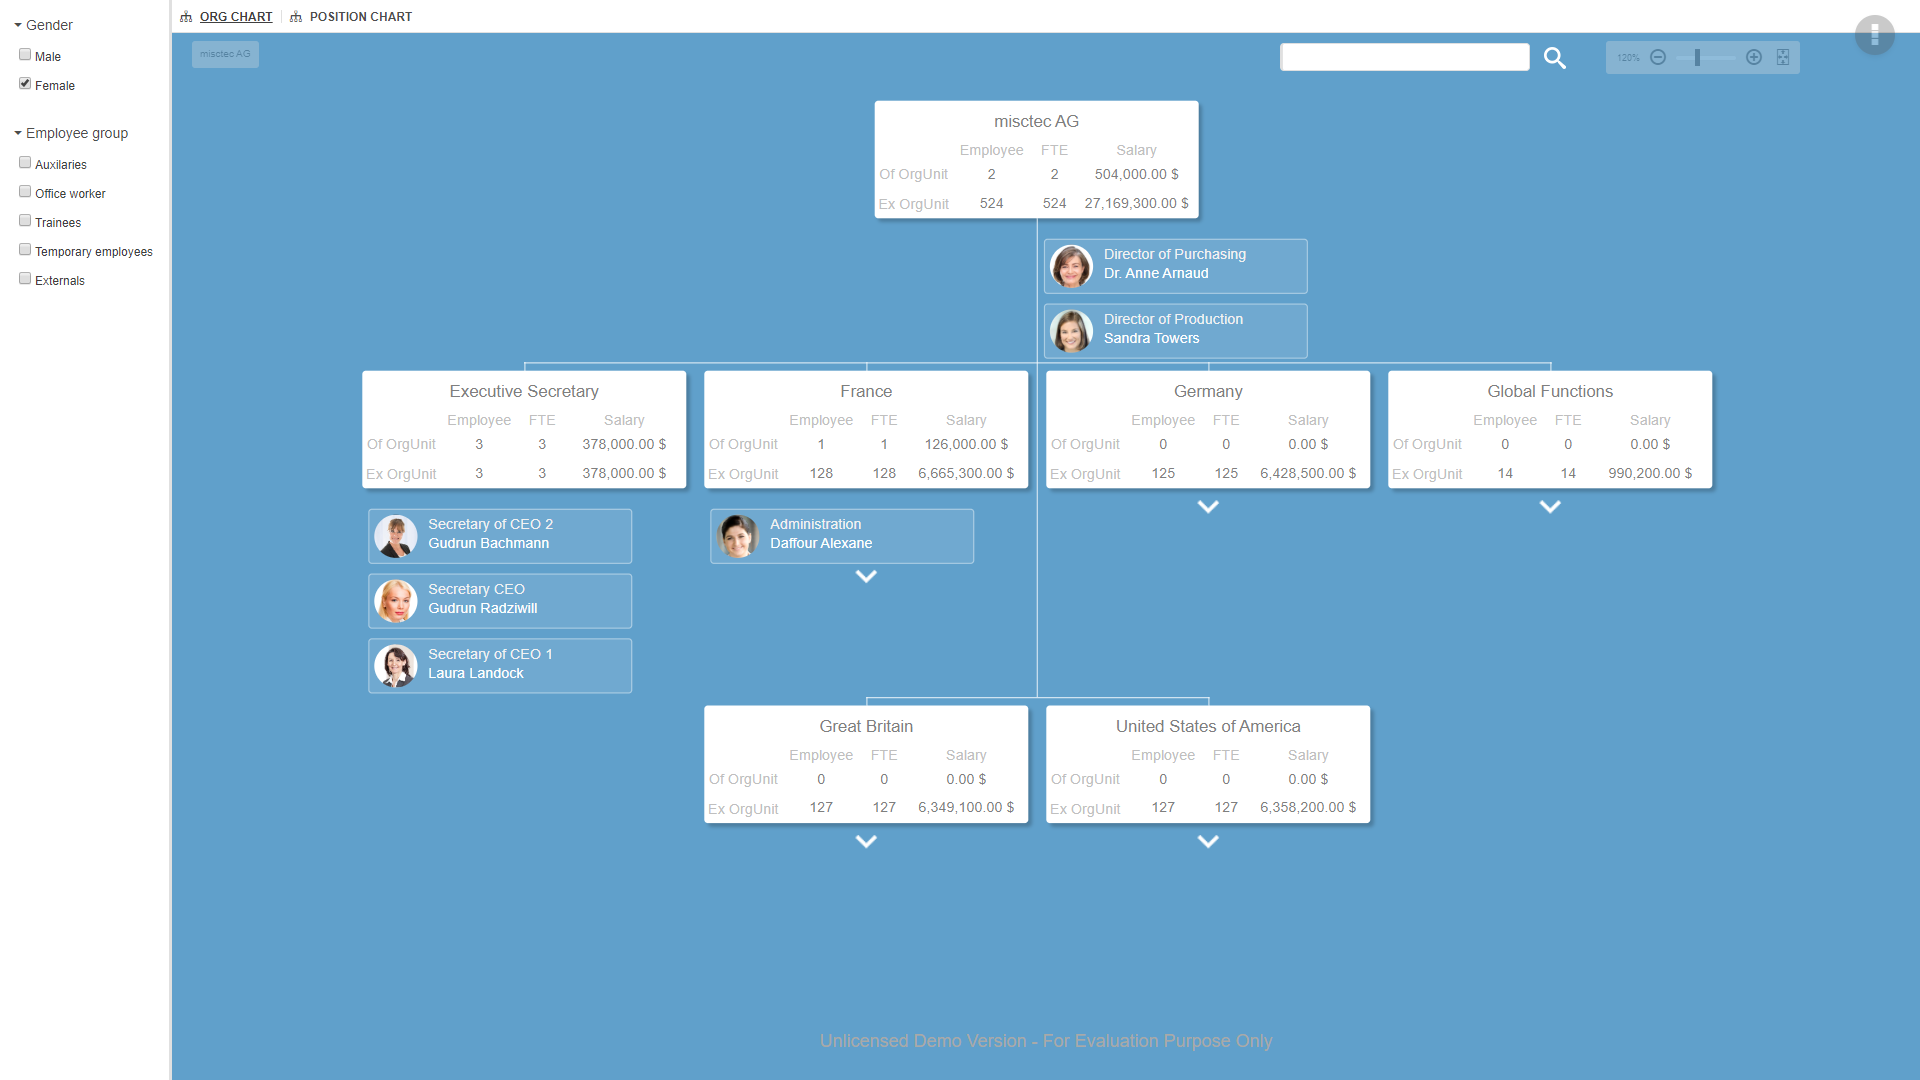 Ingentis org.manager Software - Quick and easy creation of org charts tailored to the customer's needs